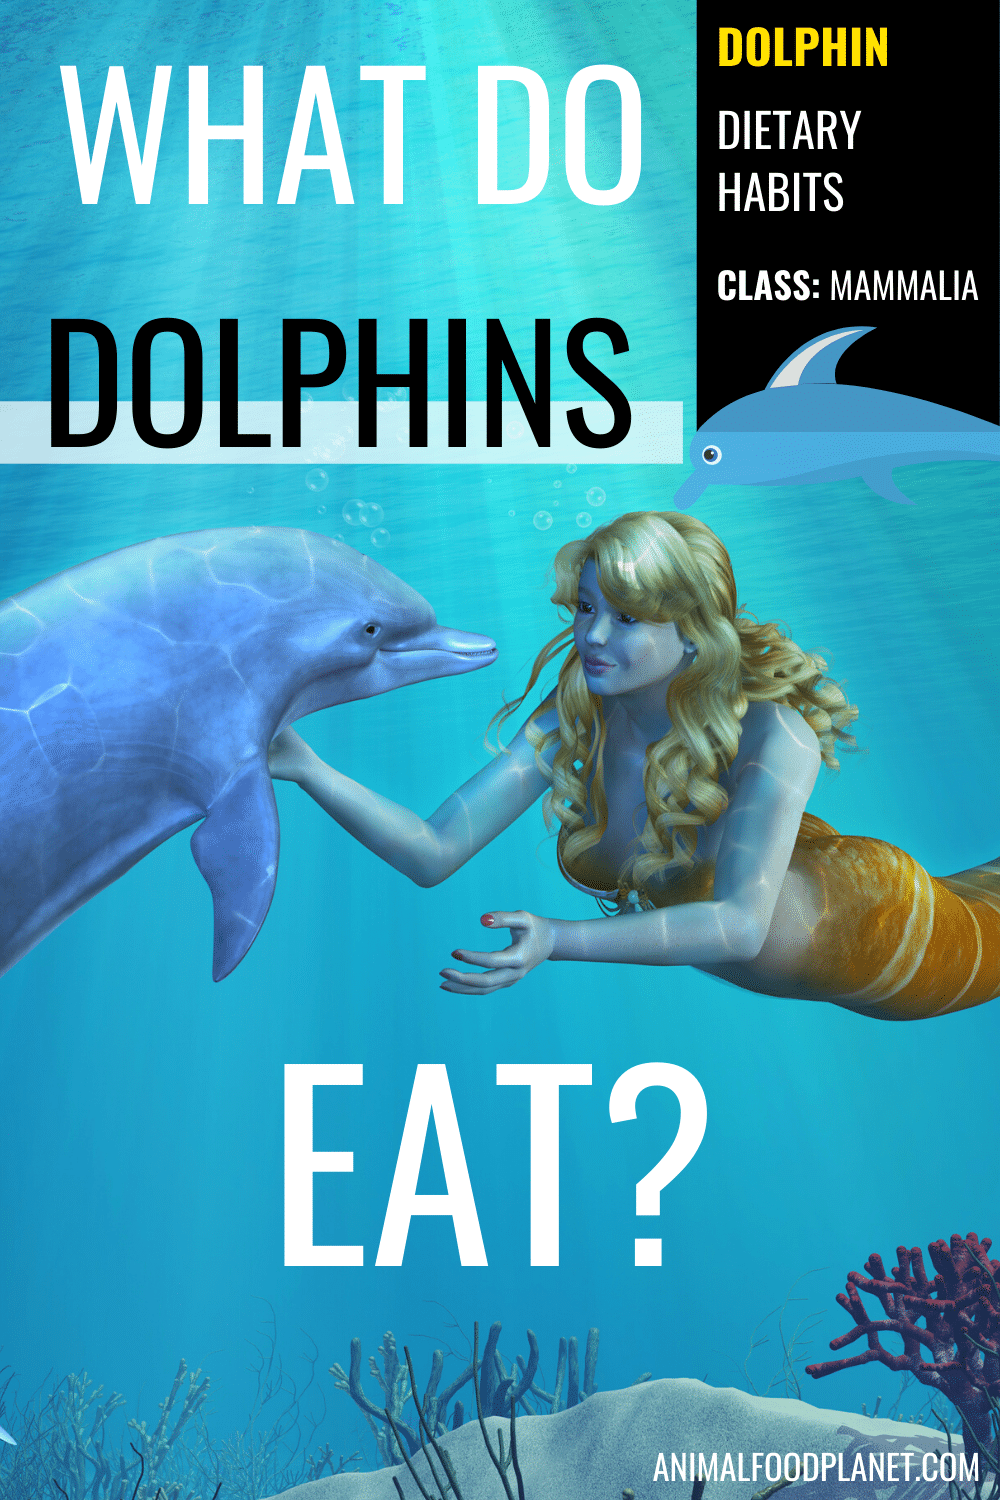 What Do Dolphins Eat?